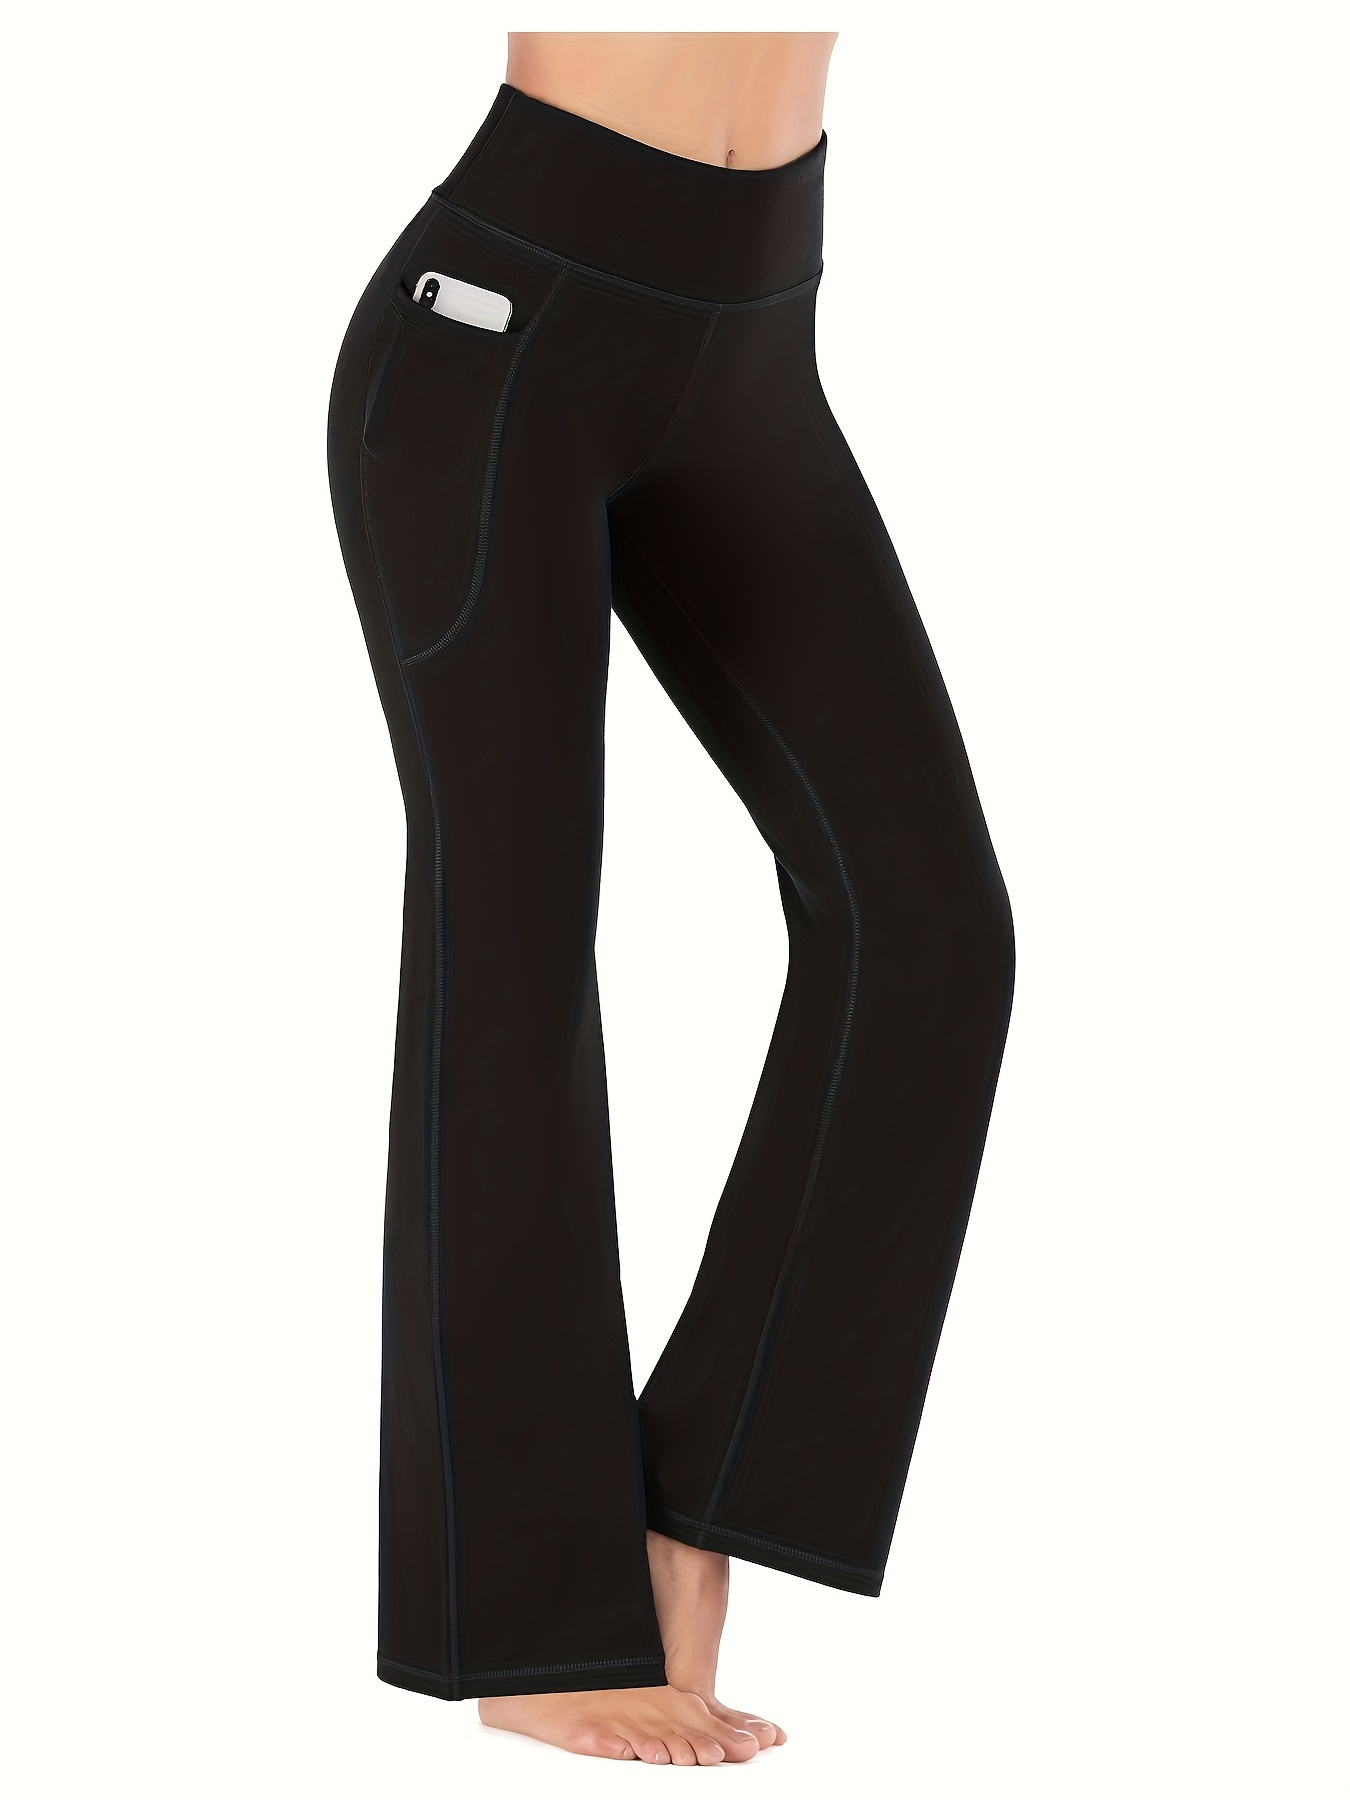 Stay Warm & Stylish with These High Waisted Fleece Flare Leggings - Women's  Activewear with Pockets!